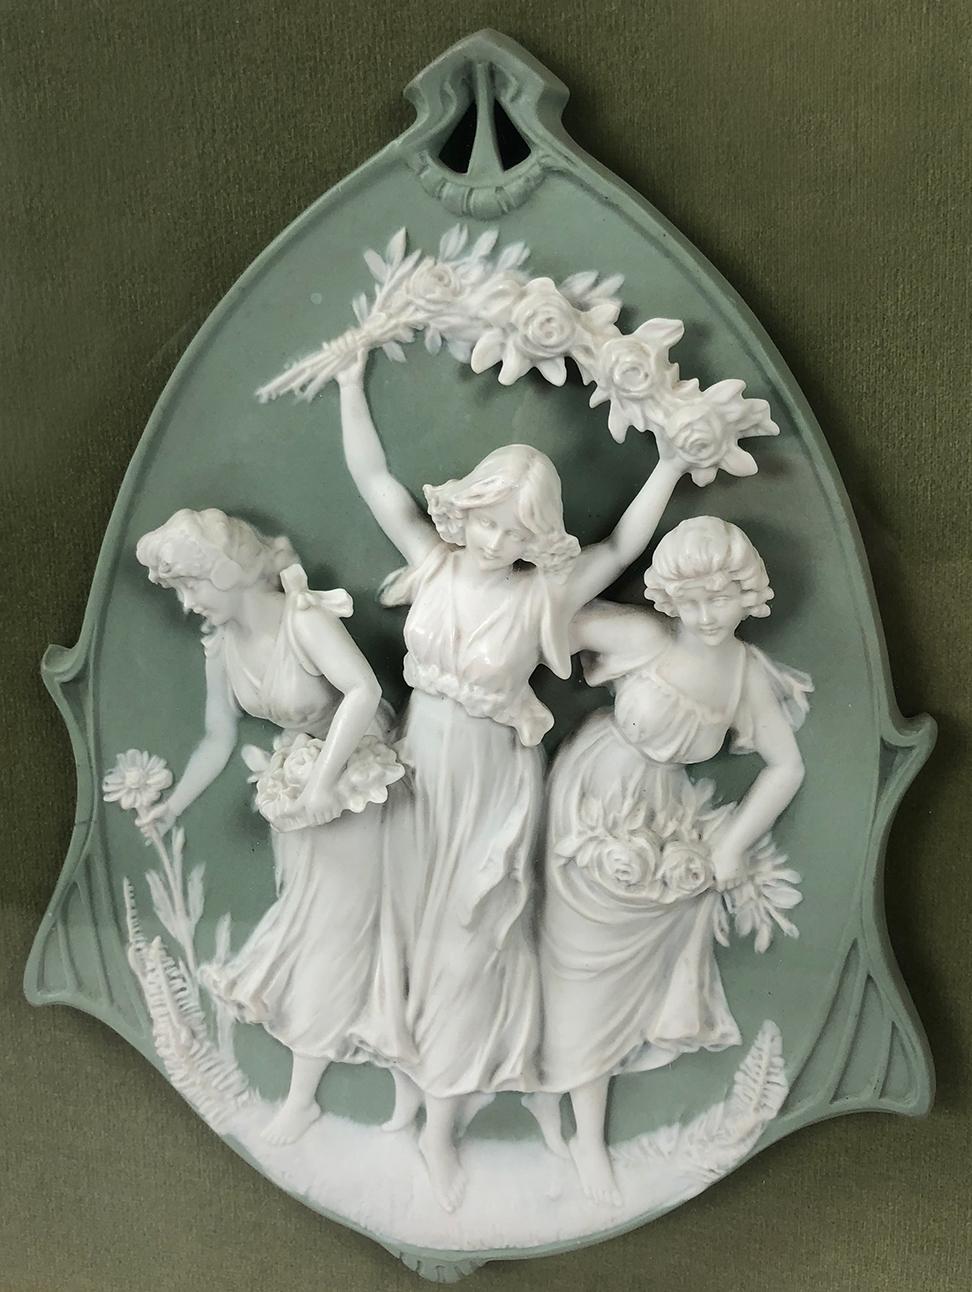 A framed biscuit porcelain Jasperware relief cameo with three women dancing and picking flowers. Likely an 18th / 19th century German wedgwood-like jasperware piece. This piece is framed in a glass floating frame on top of sage green felt. A small